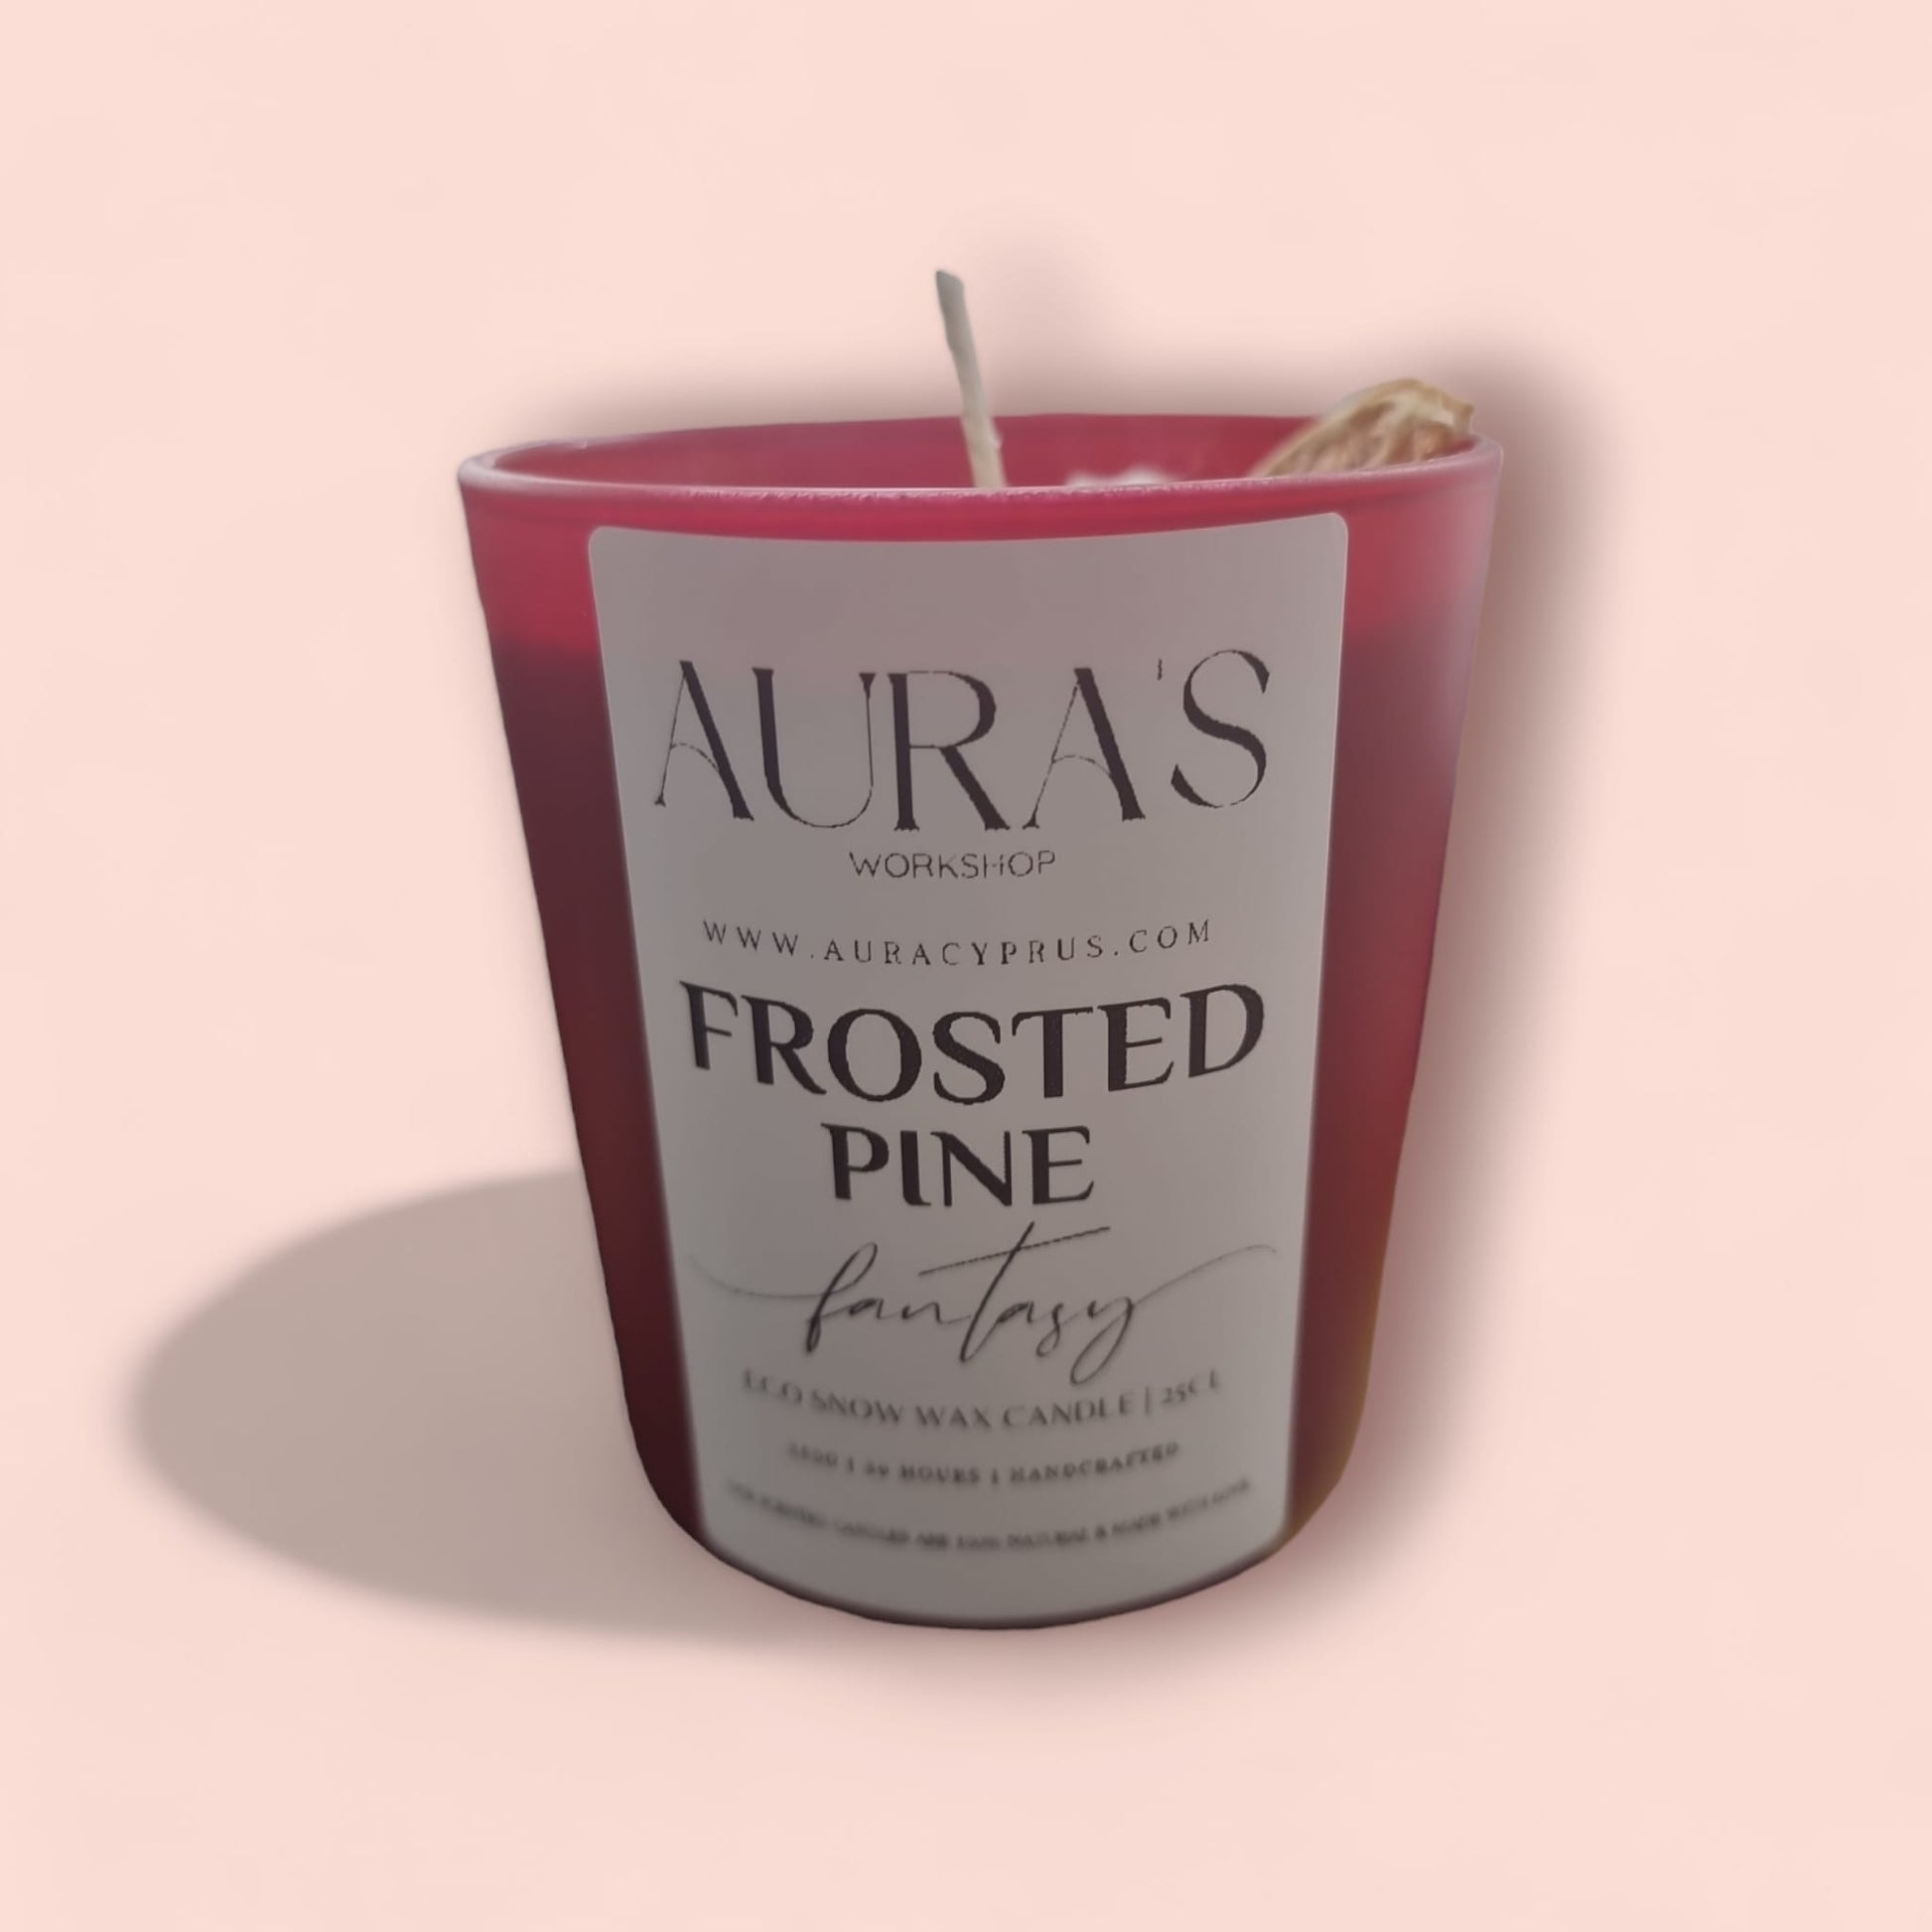 Frosted Pine Fantasy Scent - Eco Snow Candle - Auras Workshop  -  Candles -   - Cyprus & Greece - Wholesale - Retail #